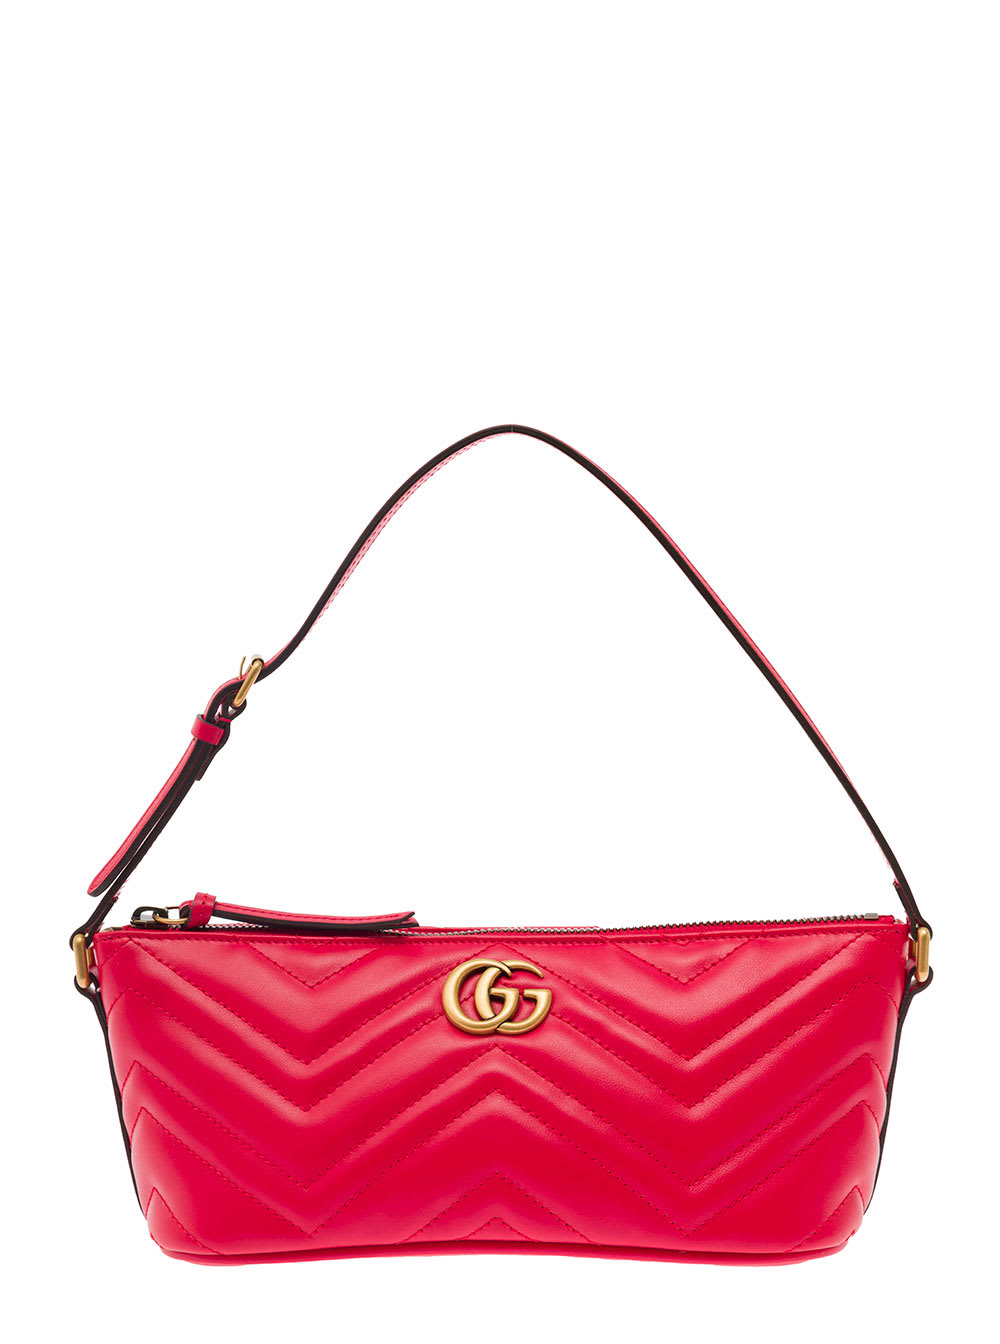 GUCCI GG MARMONT RED SHOULDRER BAG WITH DOUBLE G DETAIL IN MATELASSÉ LEATHER WOMAN